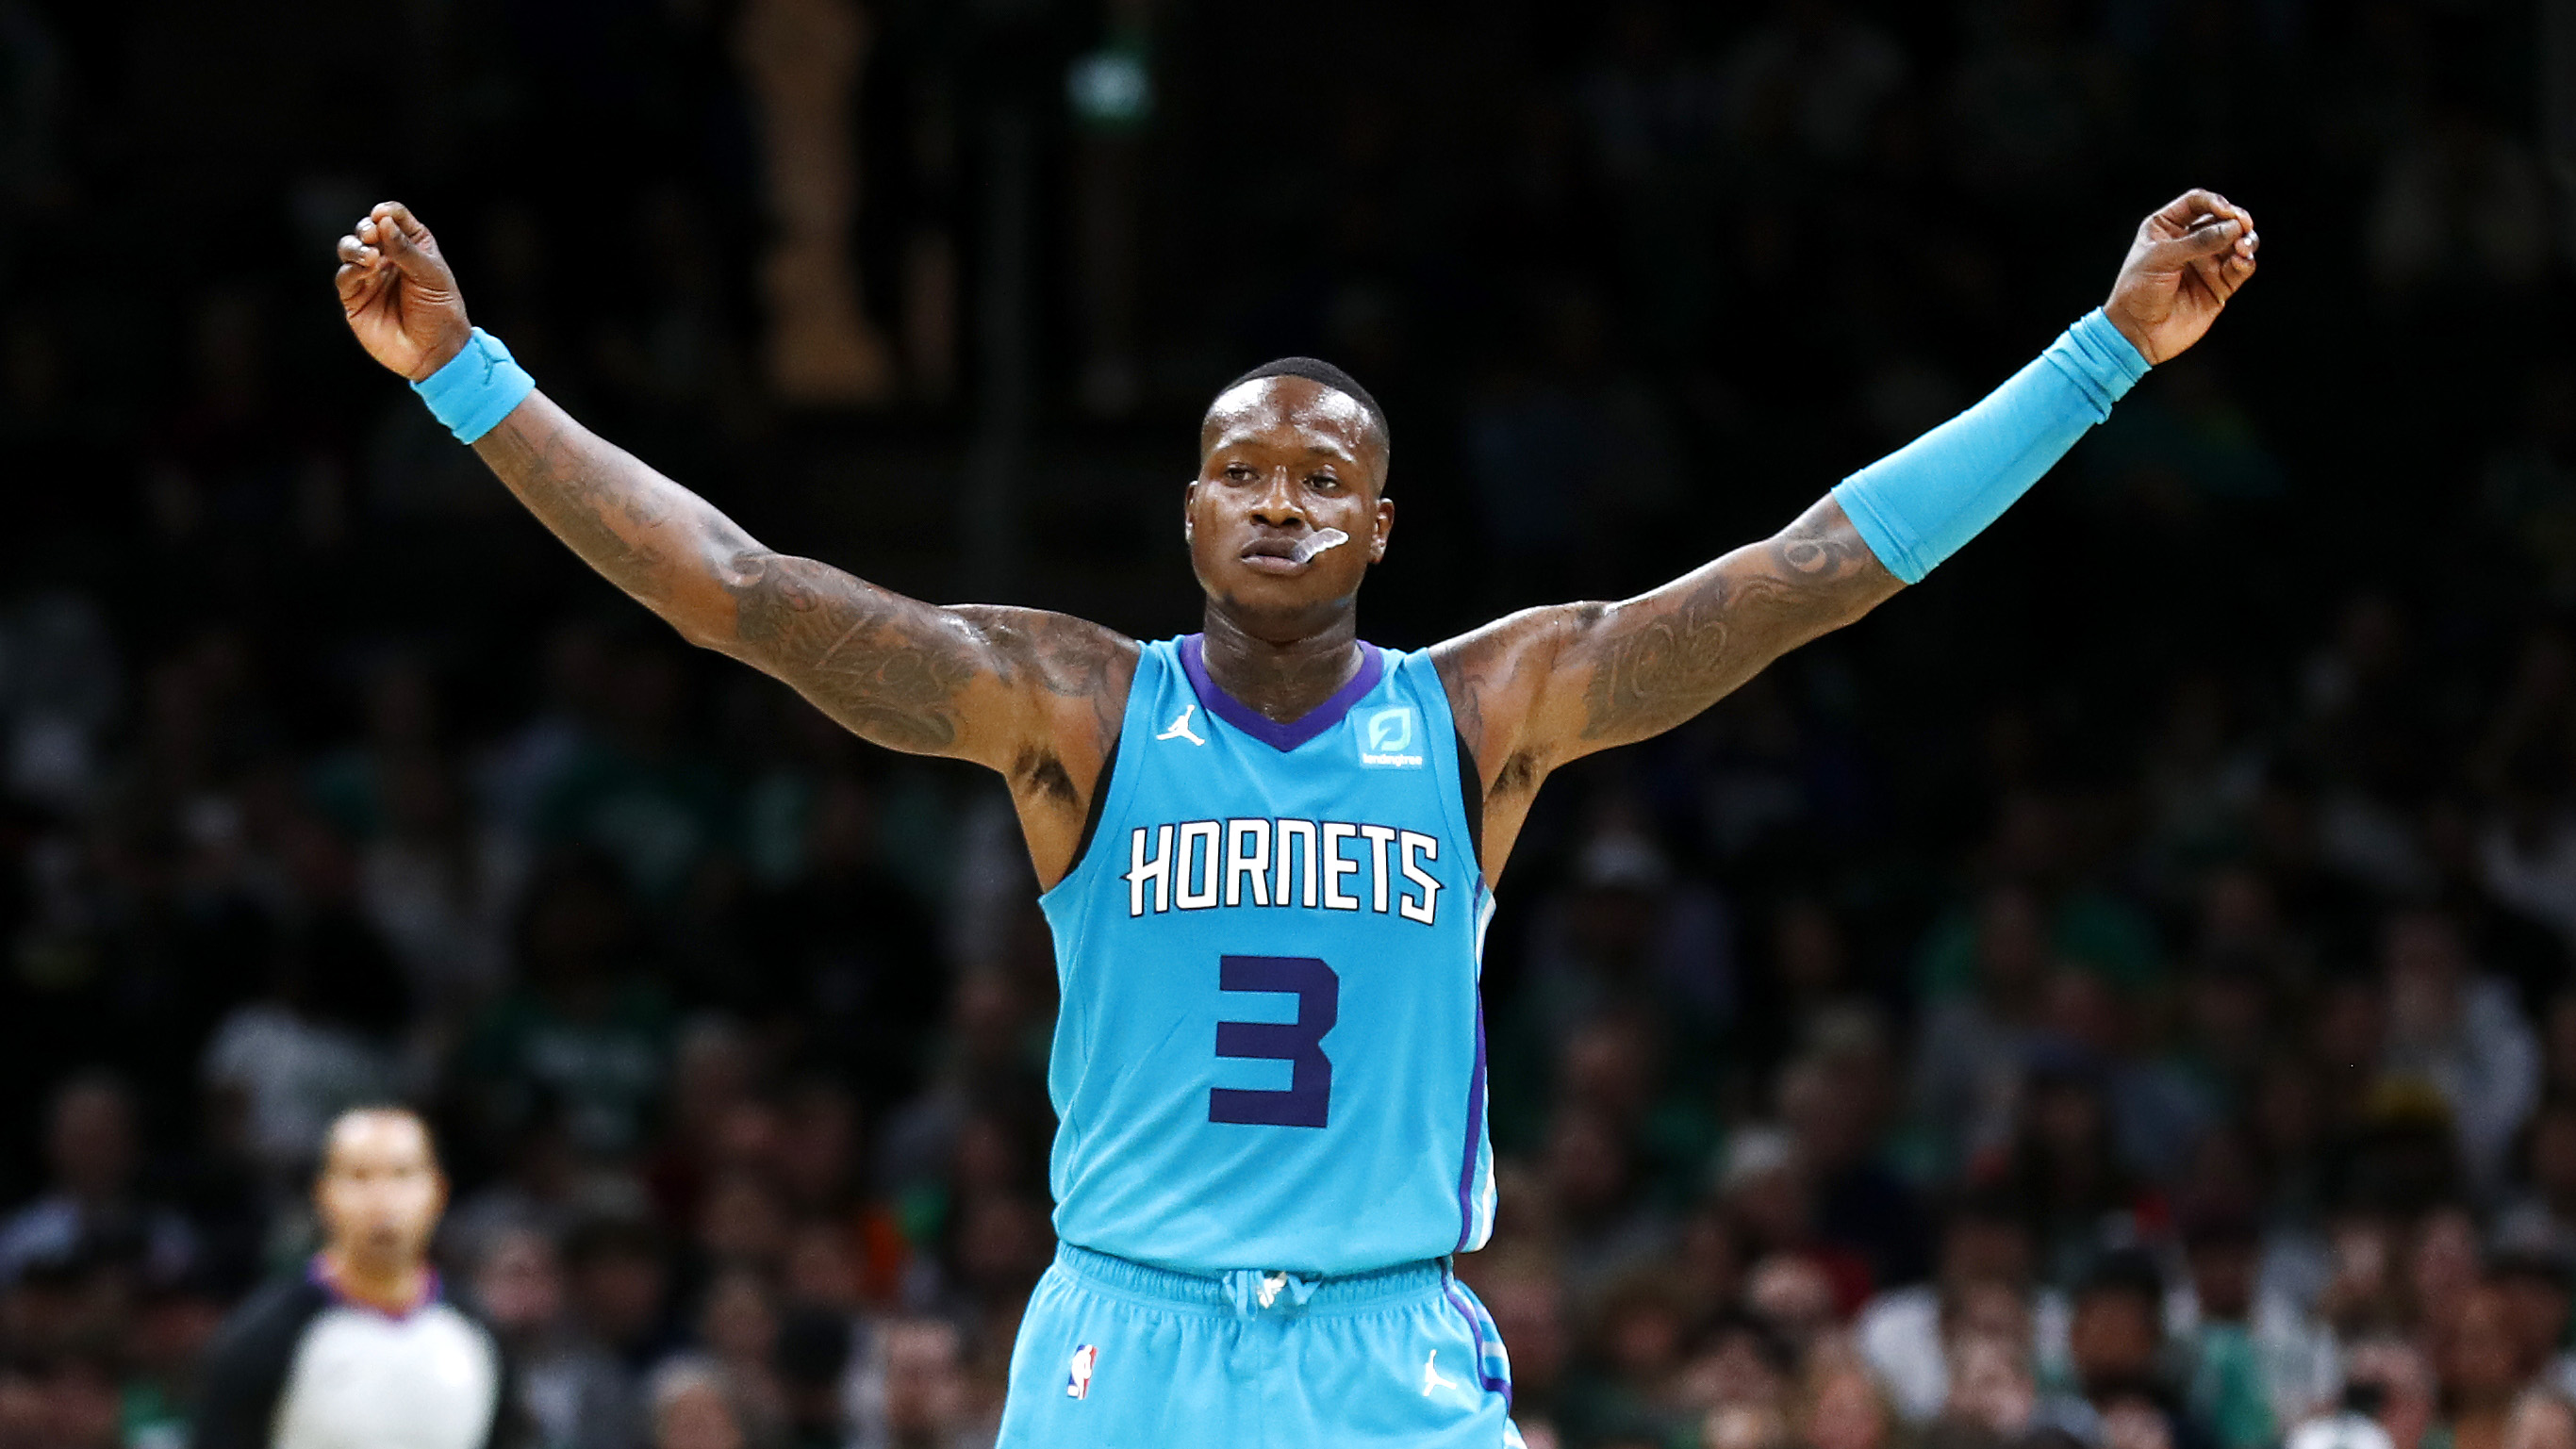 terry rozier charlotte jersey